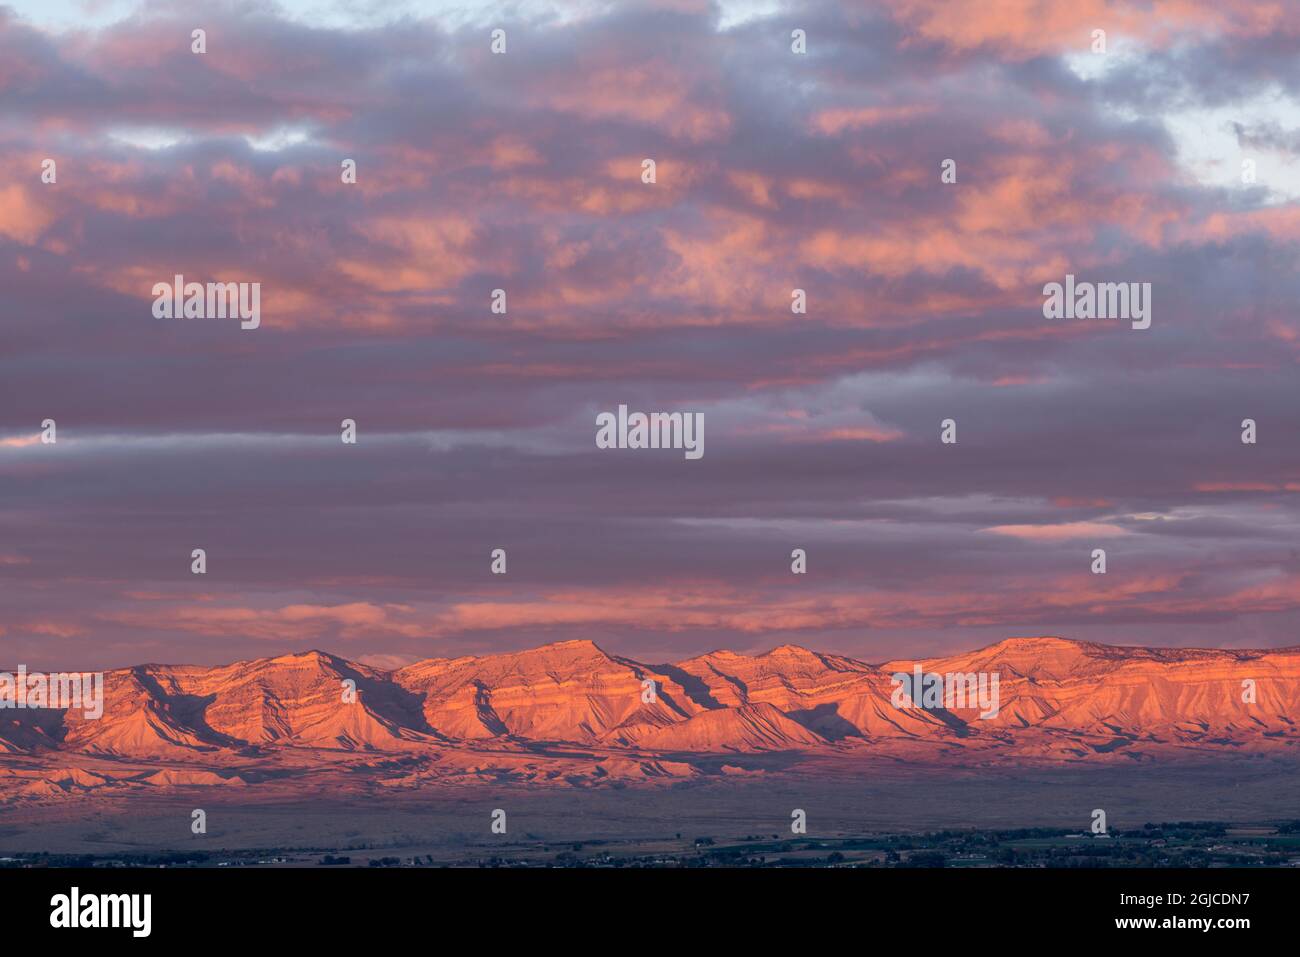 USA, Colorado, Sunset sky over Book Cliffs and town of Fruita, view north from Book Cliffs View in Colorado National Monument. Stock Photo